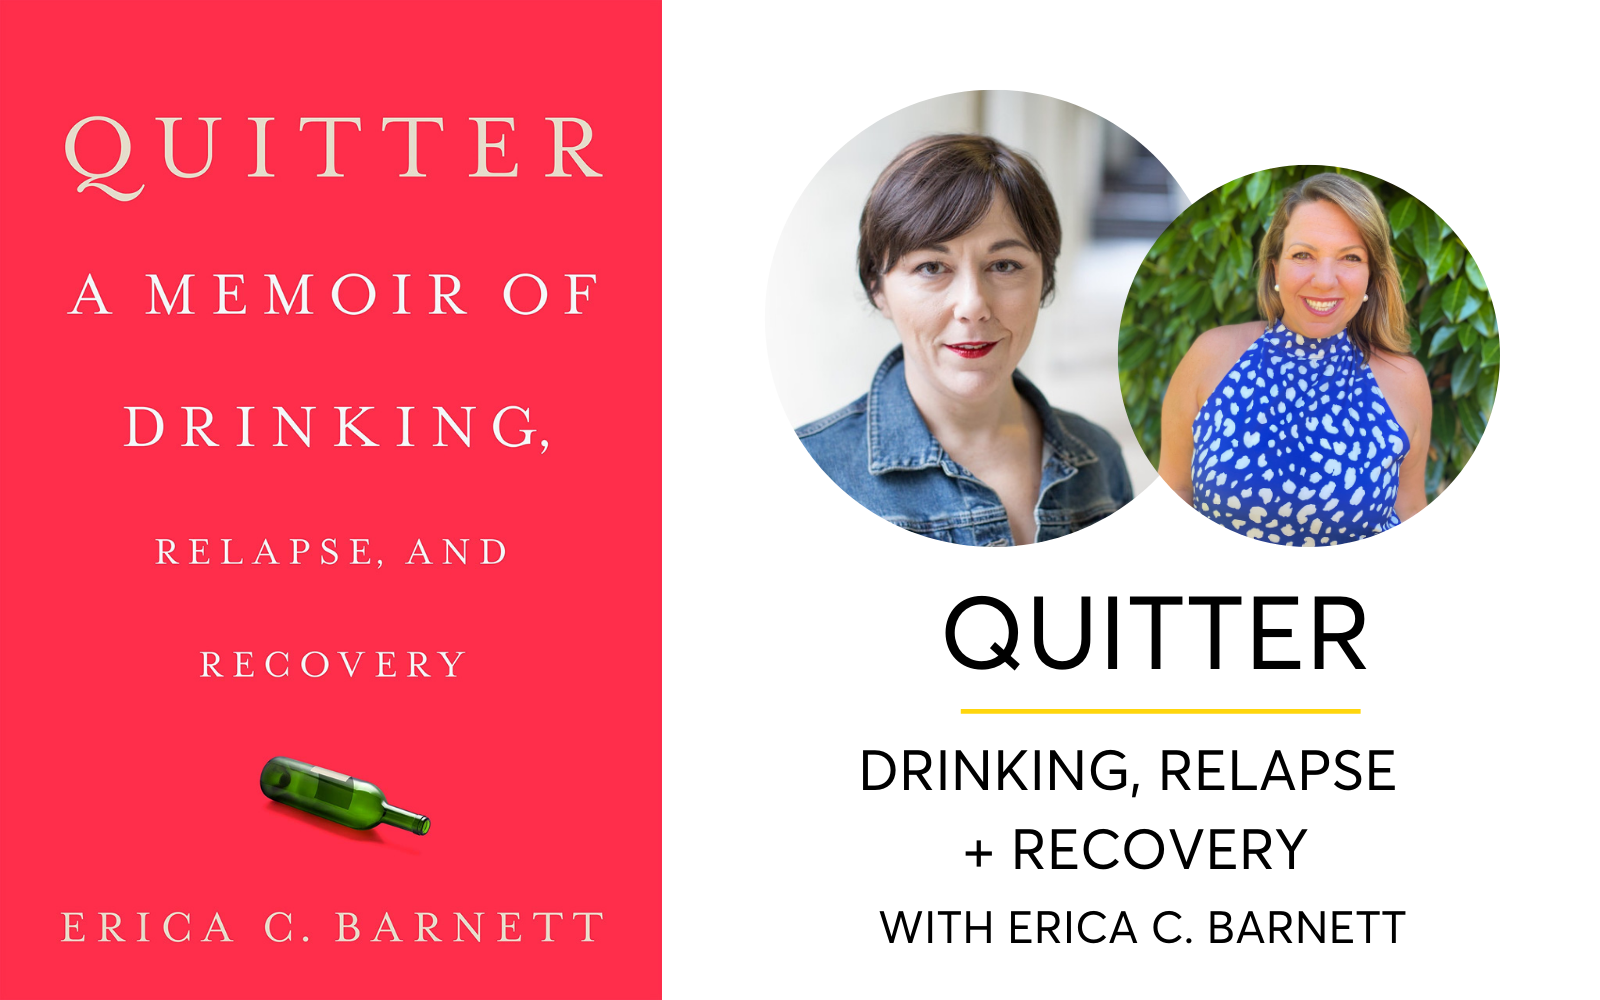 Quitter: Drinking, Relapse + The Many Paths To Recovery with author Erica C. Barnett